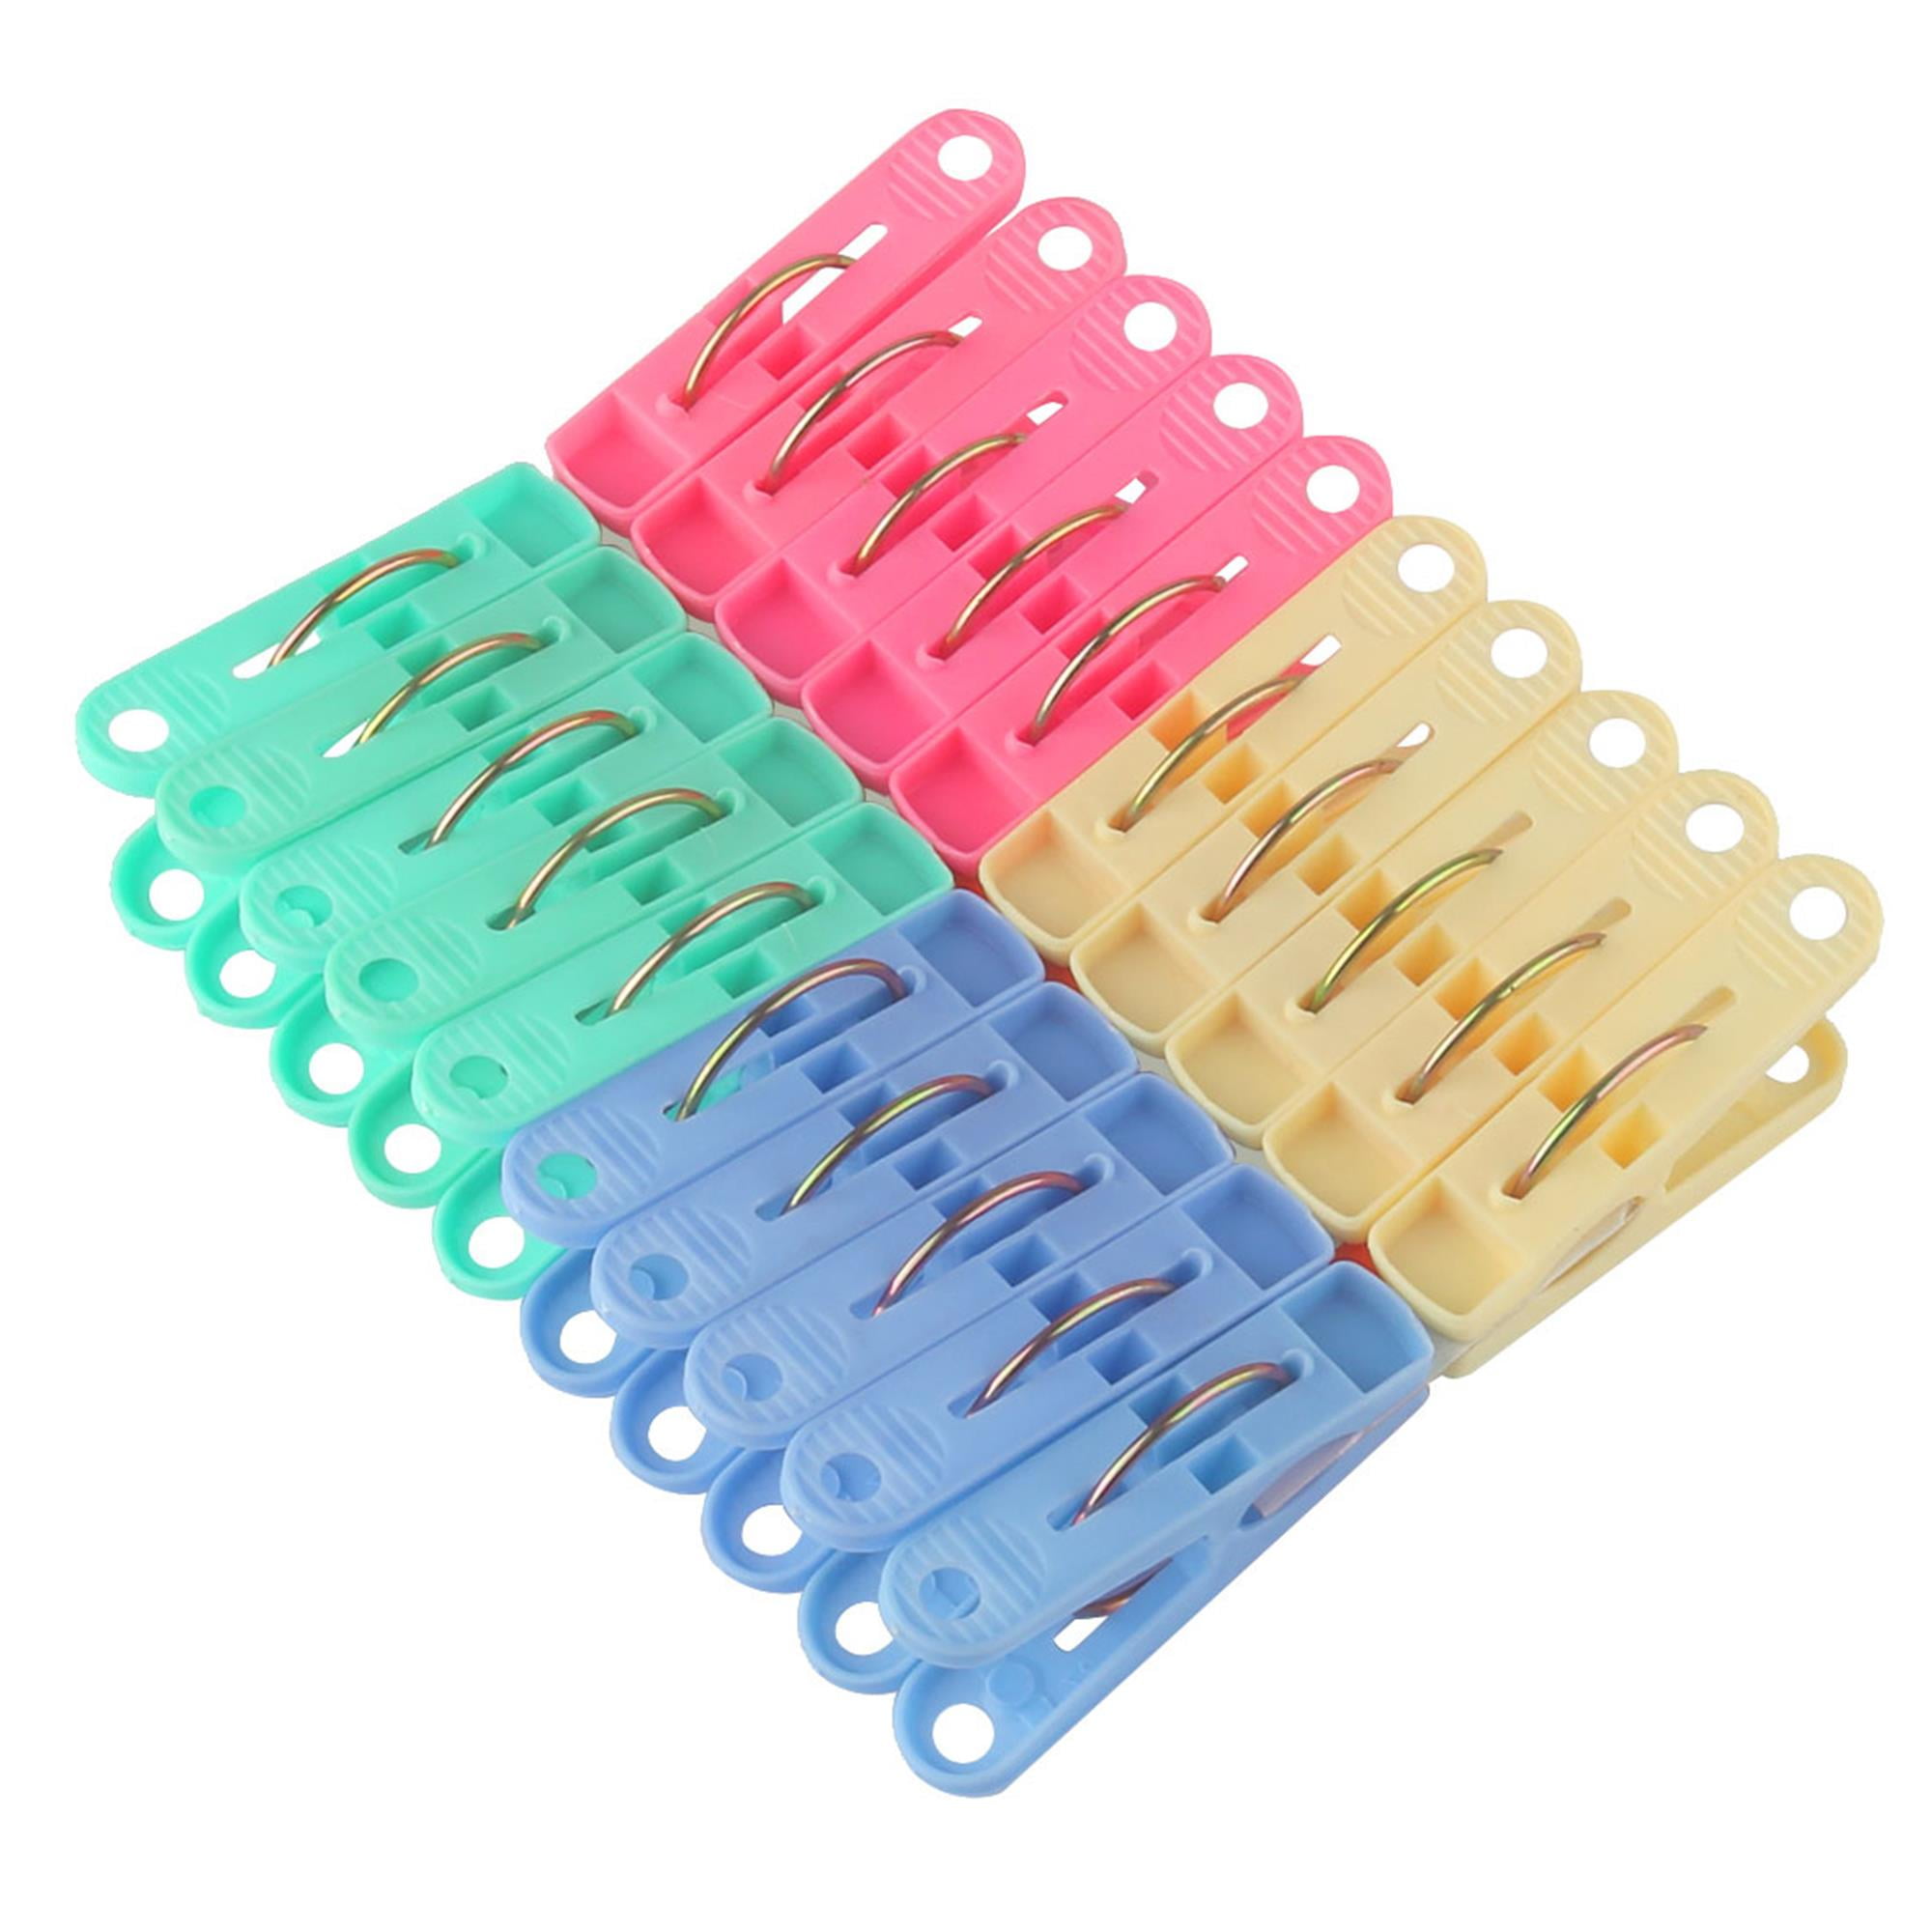 Topekada 16 Pack Heavy Duty Clothes Pins for Laundry, 2 in Plastic Clothespins Hang on The Line, Metal Spring and Pet Soft Rubber Touch and Stains